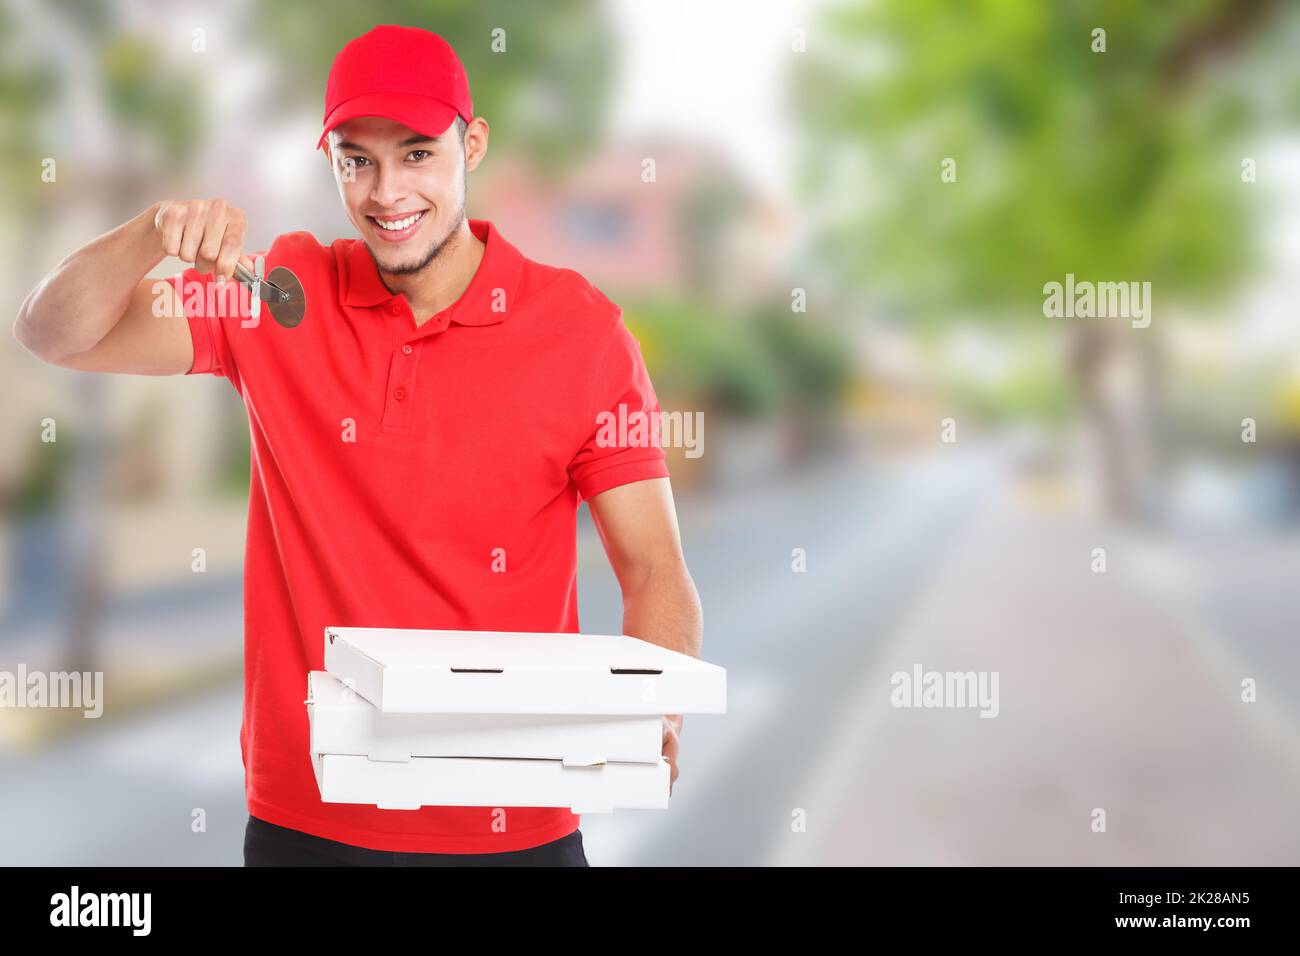 Pizza cutter fast food delivery smiling young latin man town copyspace copy space delivering deliver Stock Photo